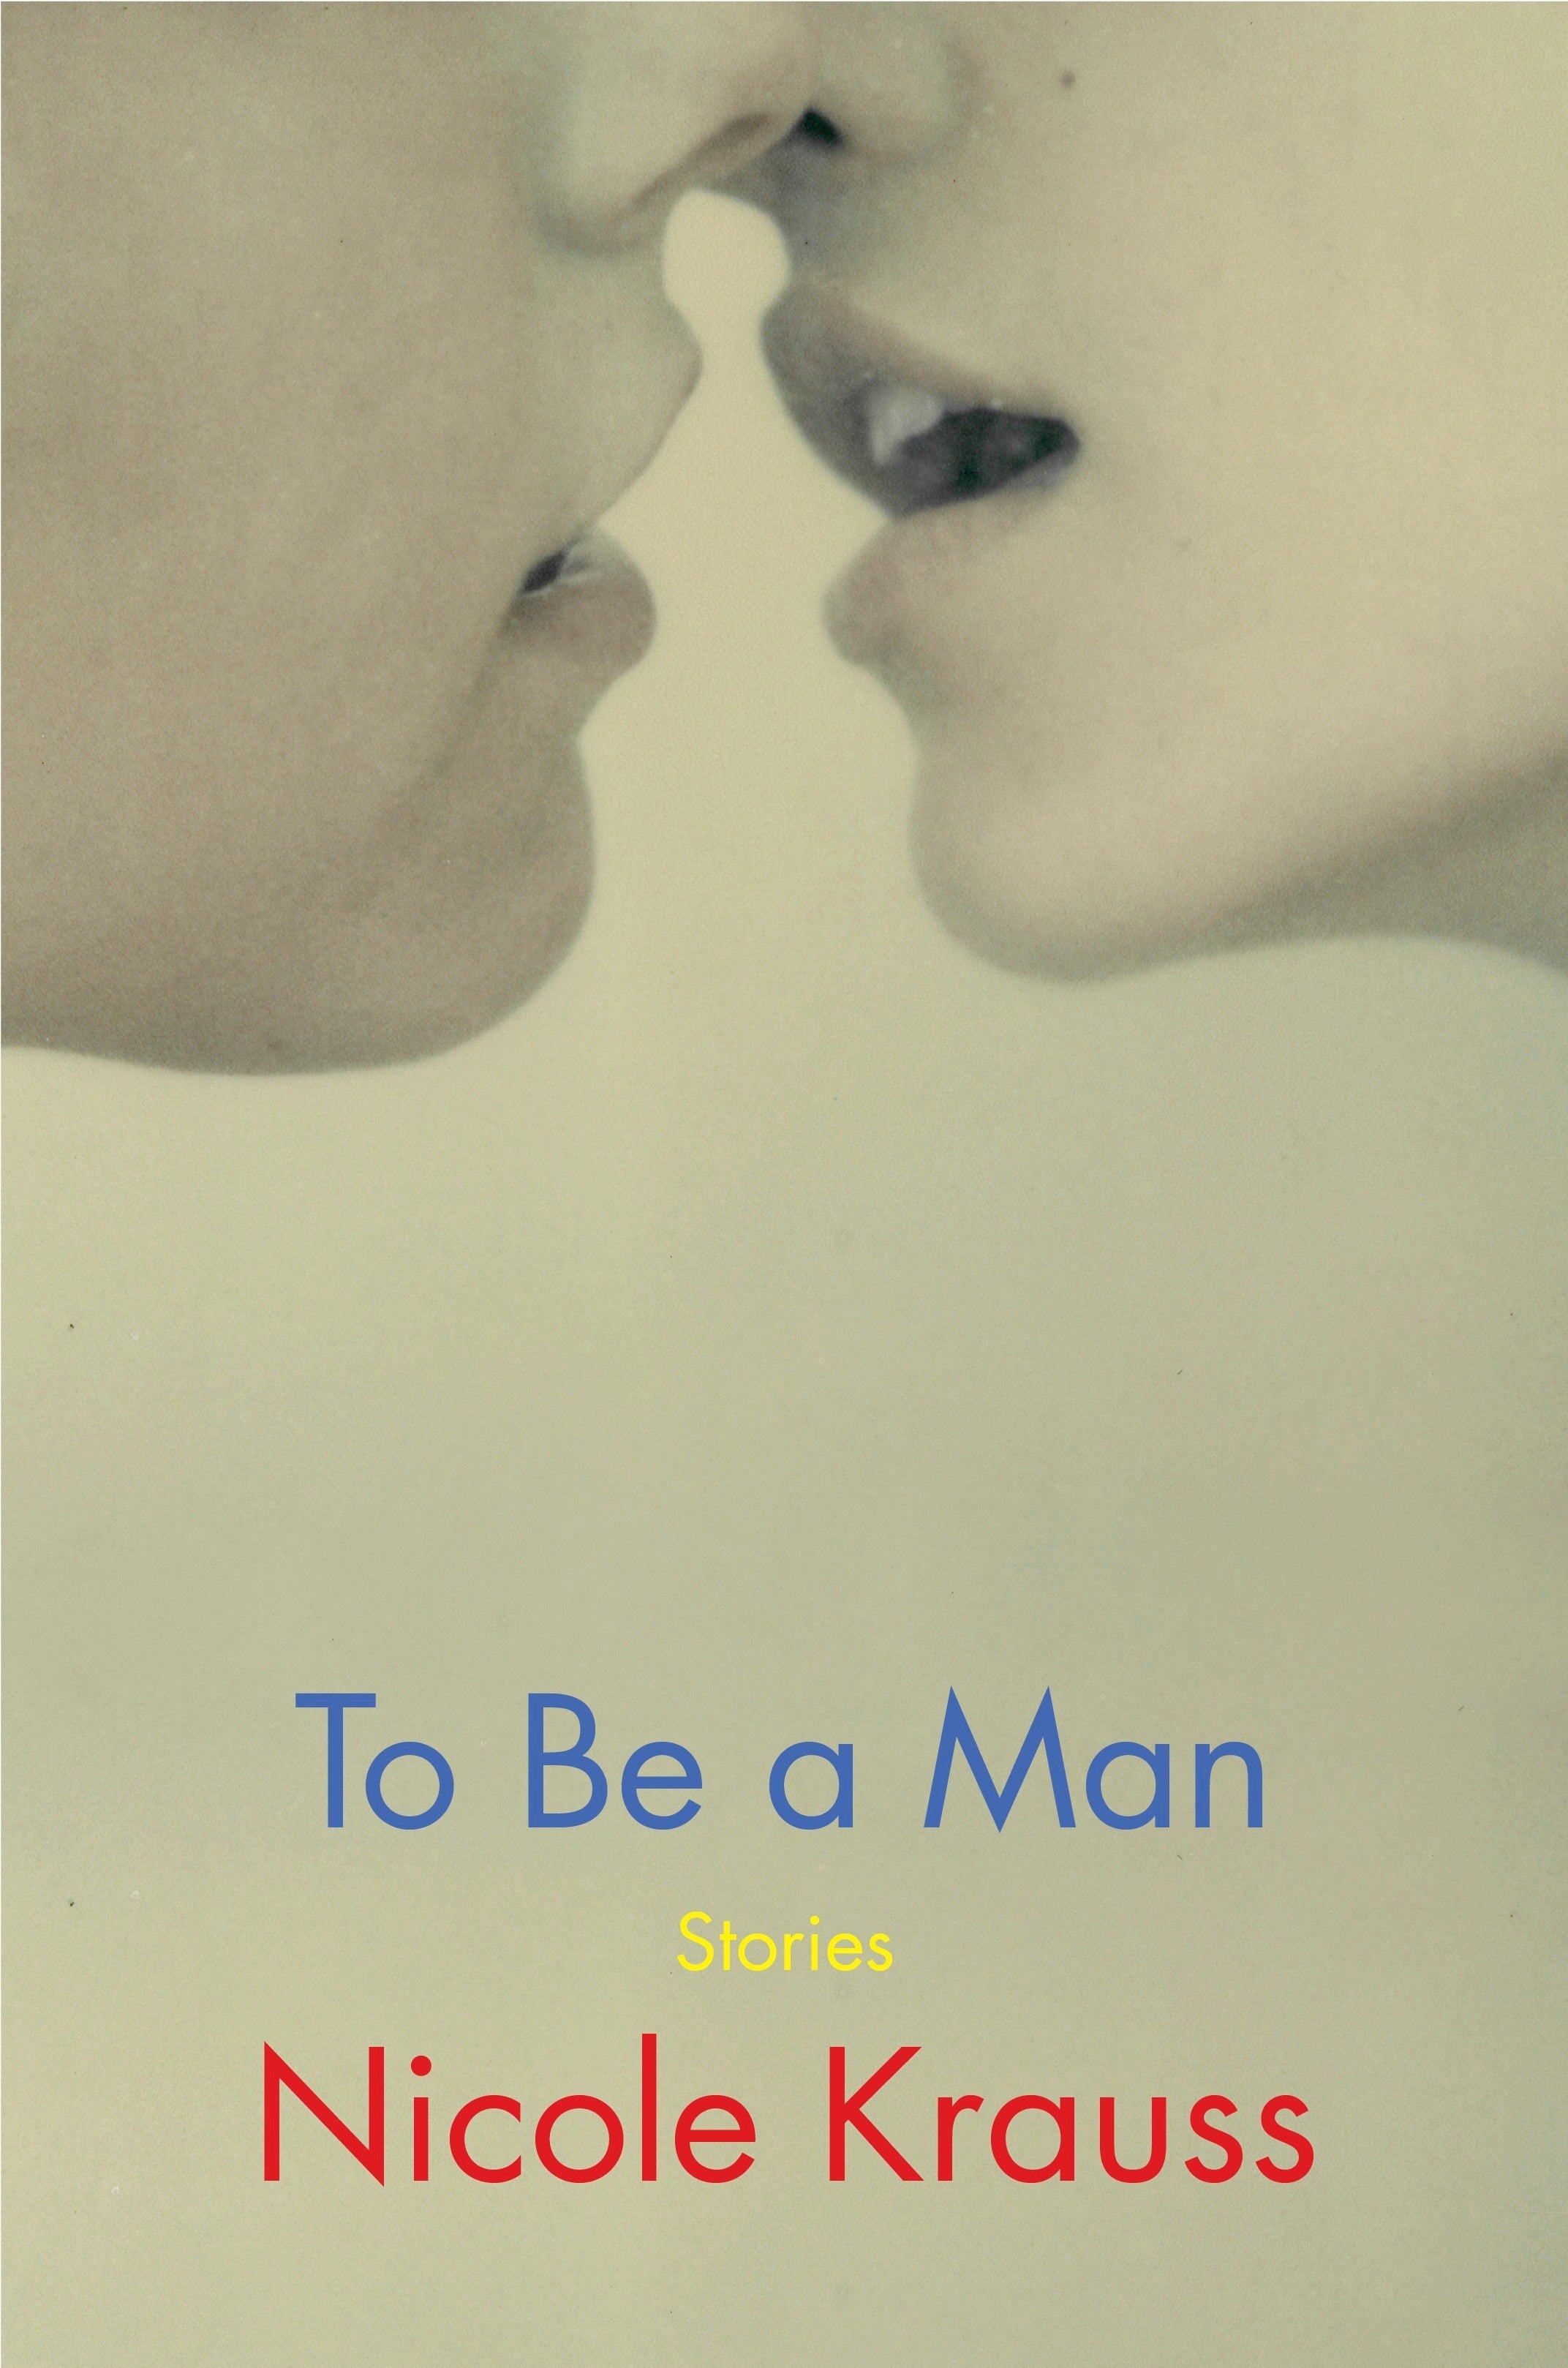 Book Review - To Be a Man